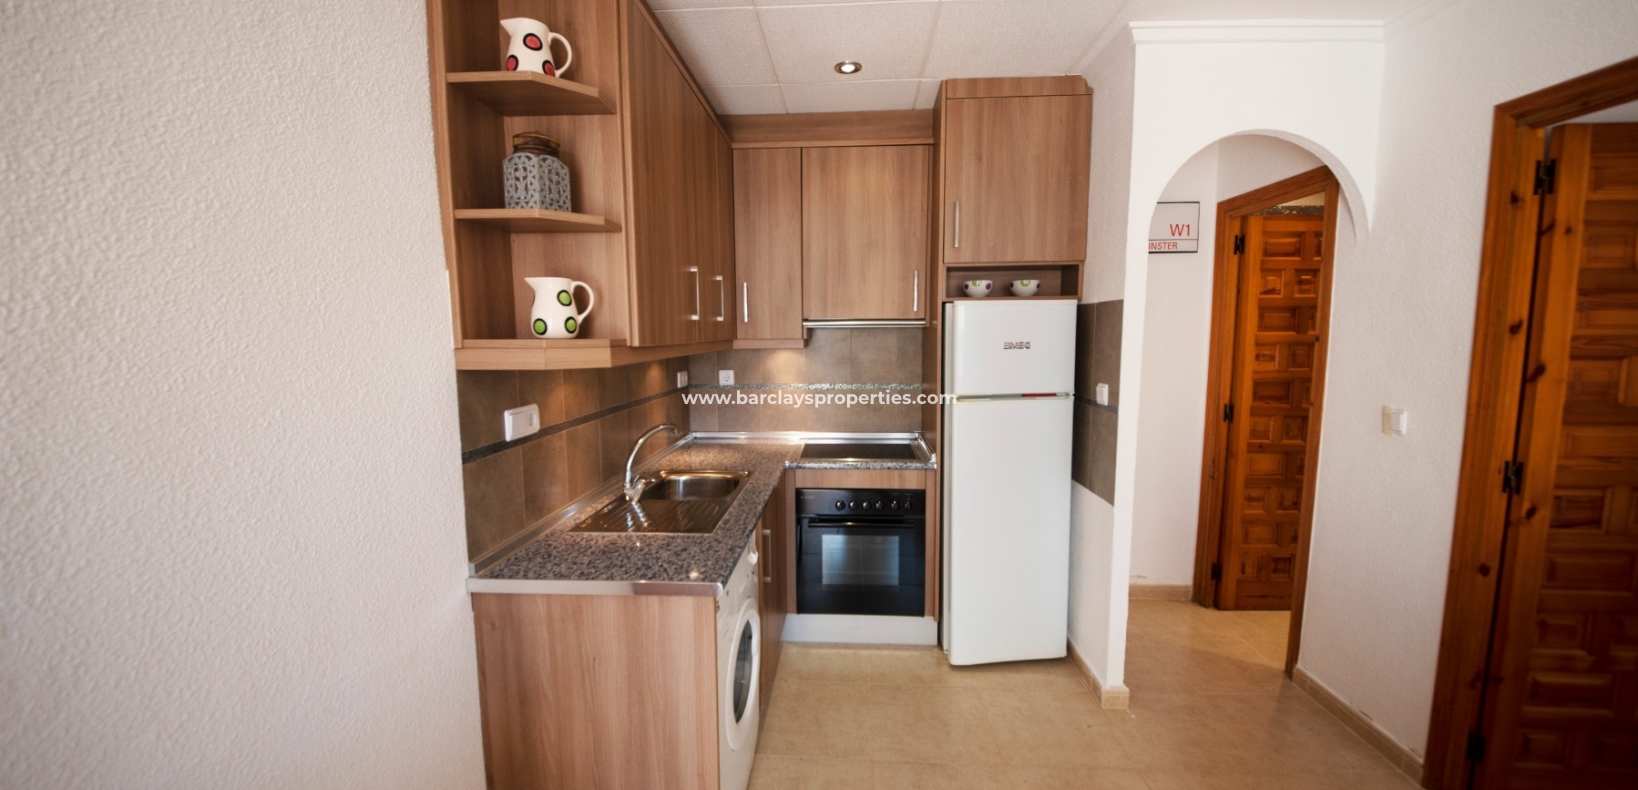 Kitchen - South Facing Terraced House For Sale in Alicante, Spain